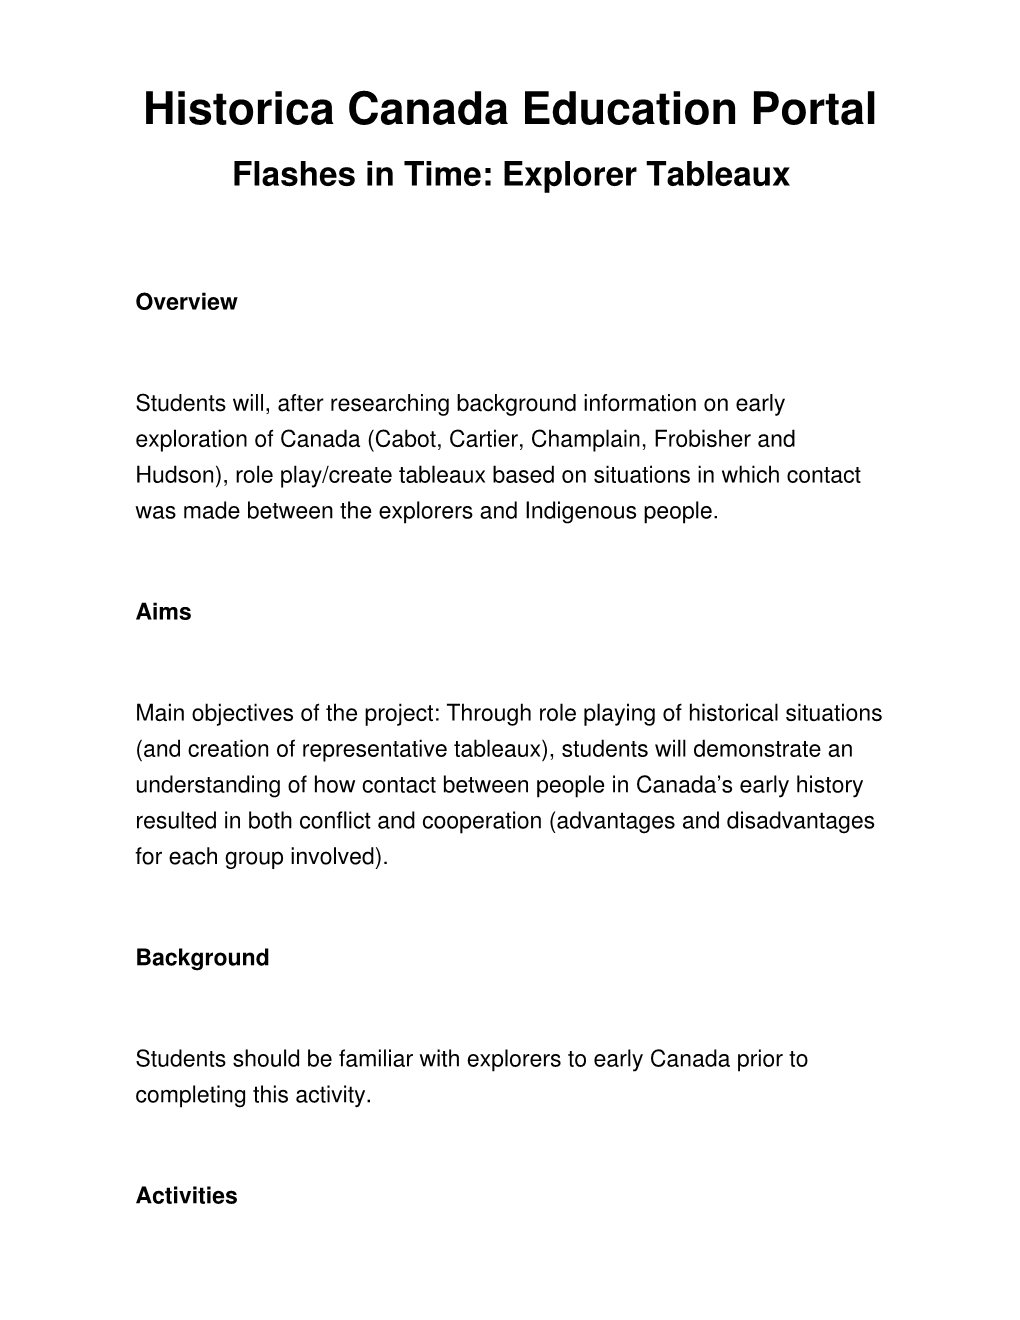 Flashes in Time: Explorer Tableaux